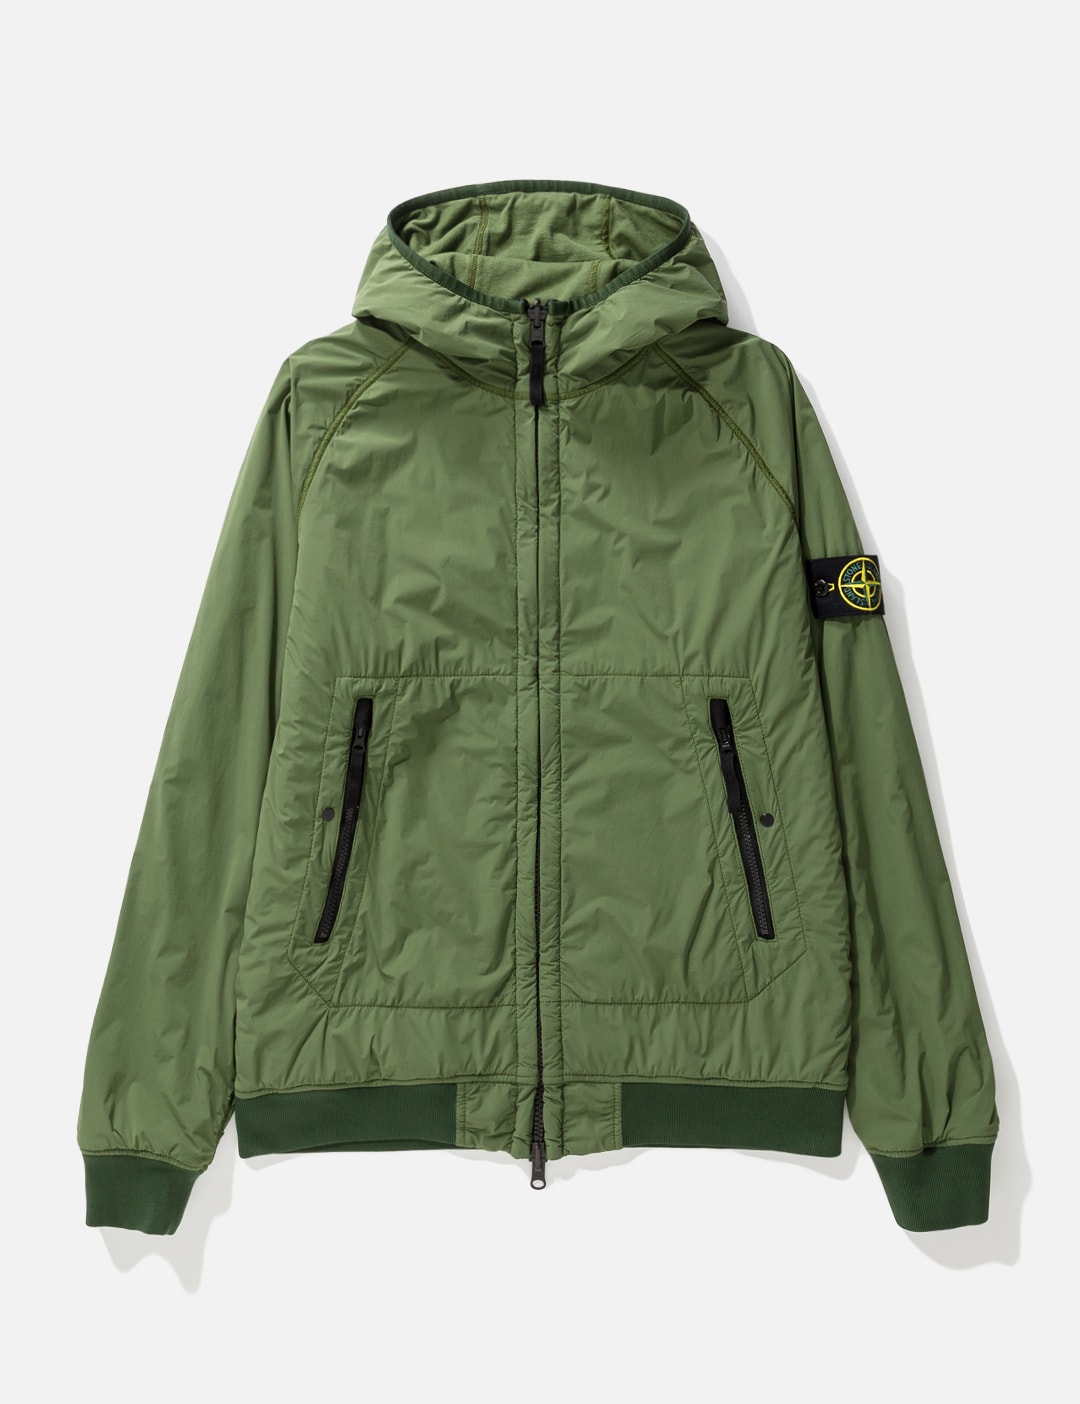 Integreren overdrijven Verwijdering Stone Island - Comfort Tech Composite Polartec® Alpha® Jacket | HBX -  Globally Curated Fashion and Lifestyle by Hypebeast